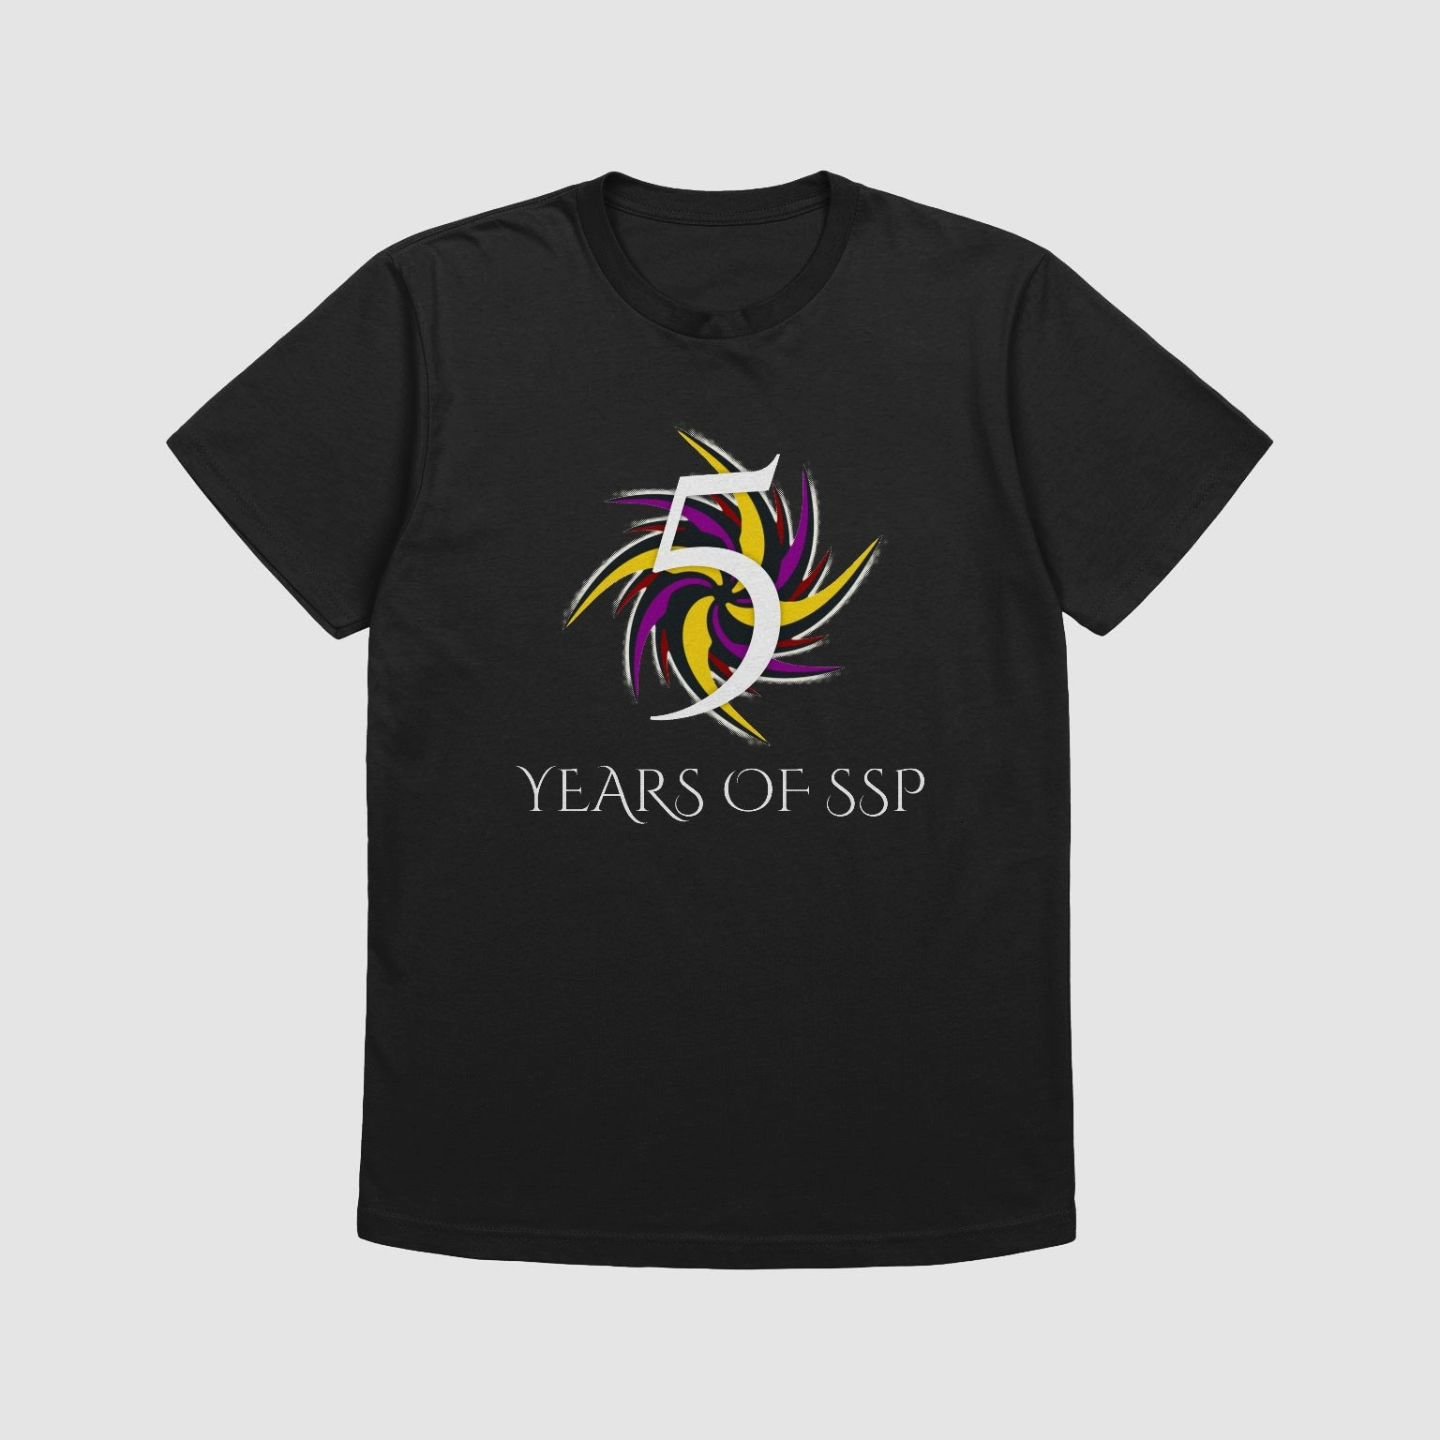 New merch alert! 

Head over to our store to explore new designs celebrating our 5th year and check out our other bags, pins, shirts, and more!
https://www.shadow-spark-publishing-shop.fourthwall.com

#merch #merchdesign #newmerch #bookmerch #publish